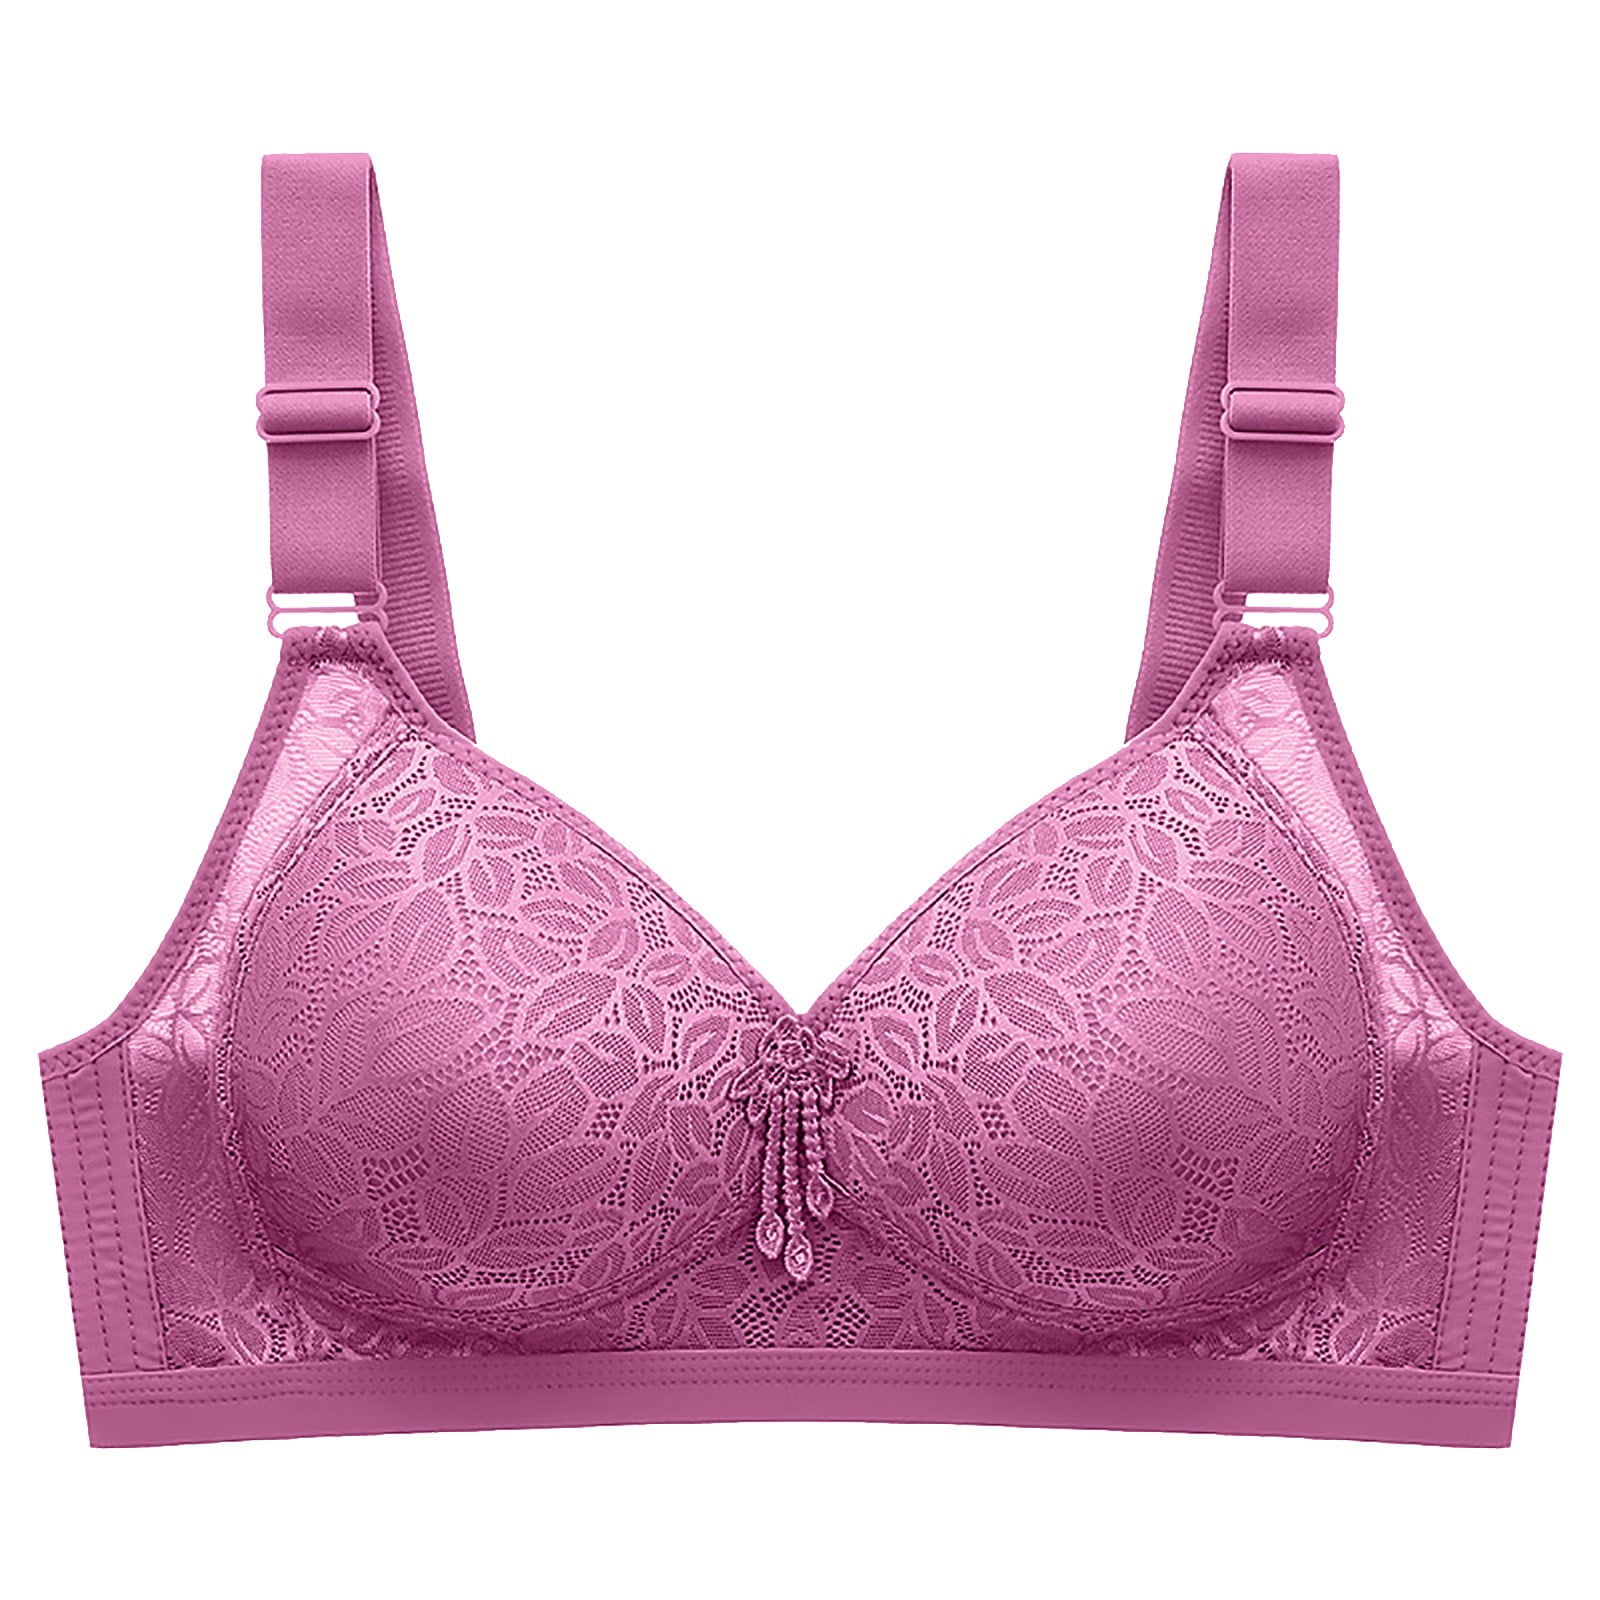 GWAABD Wide Band Bras for Women Full Cup Thin Underwear Small Bra